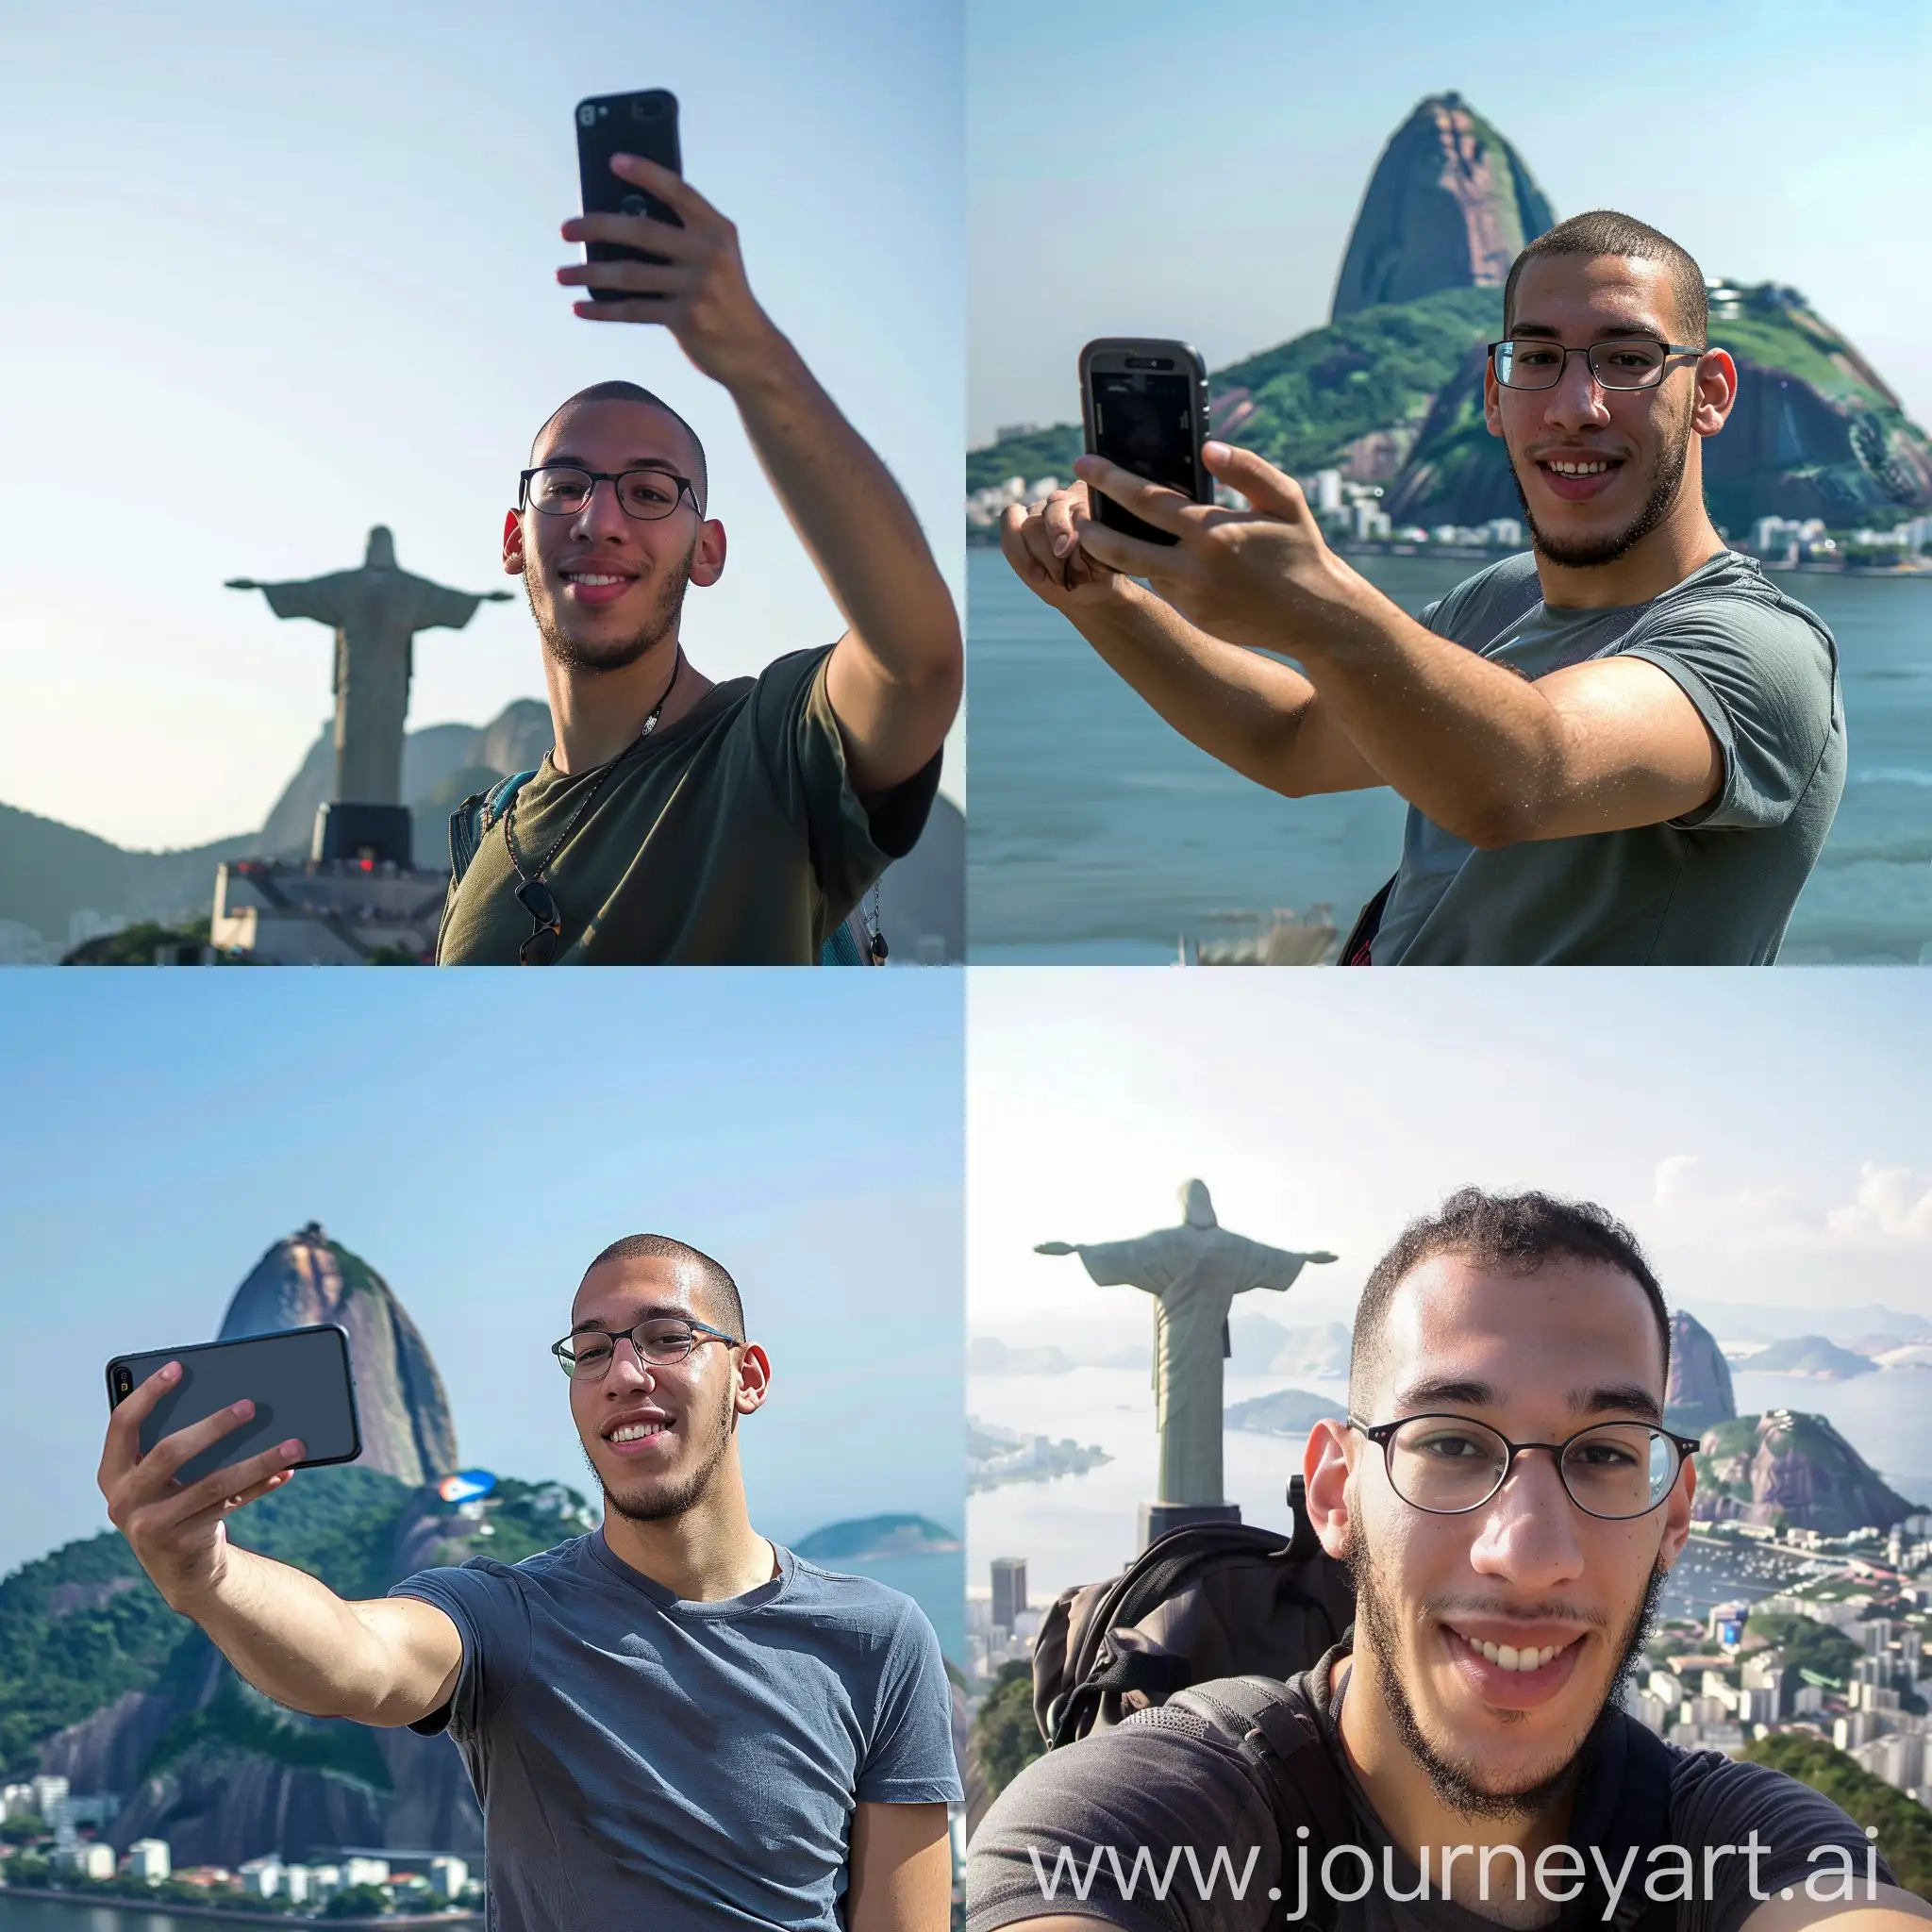 Young-Man-Capturing-Selfie-with-Christ-the-Redeemer-in-Rio-de-Janeiro